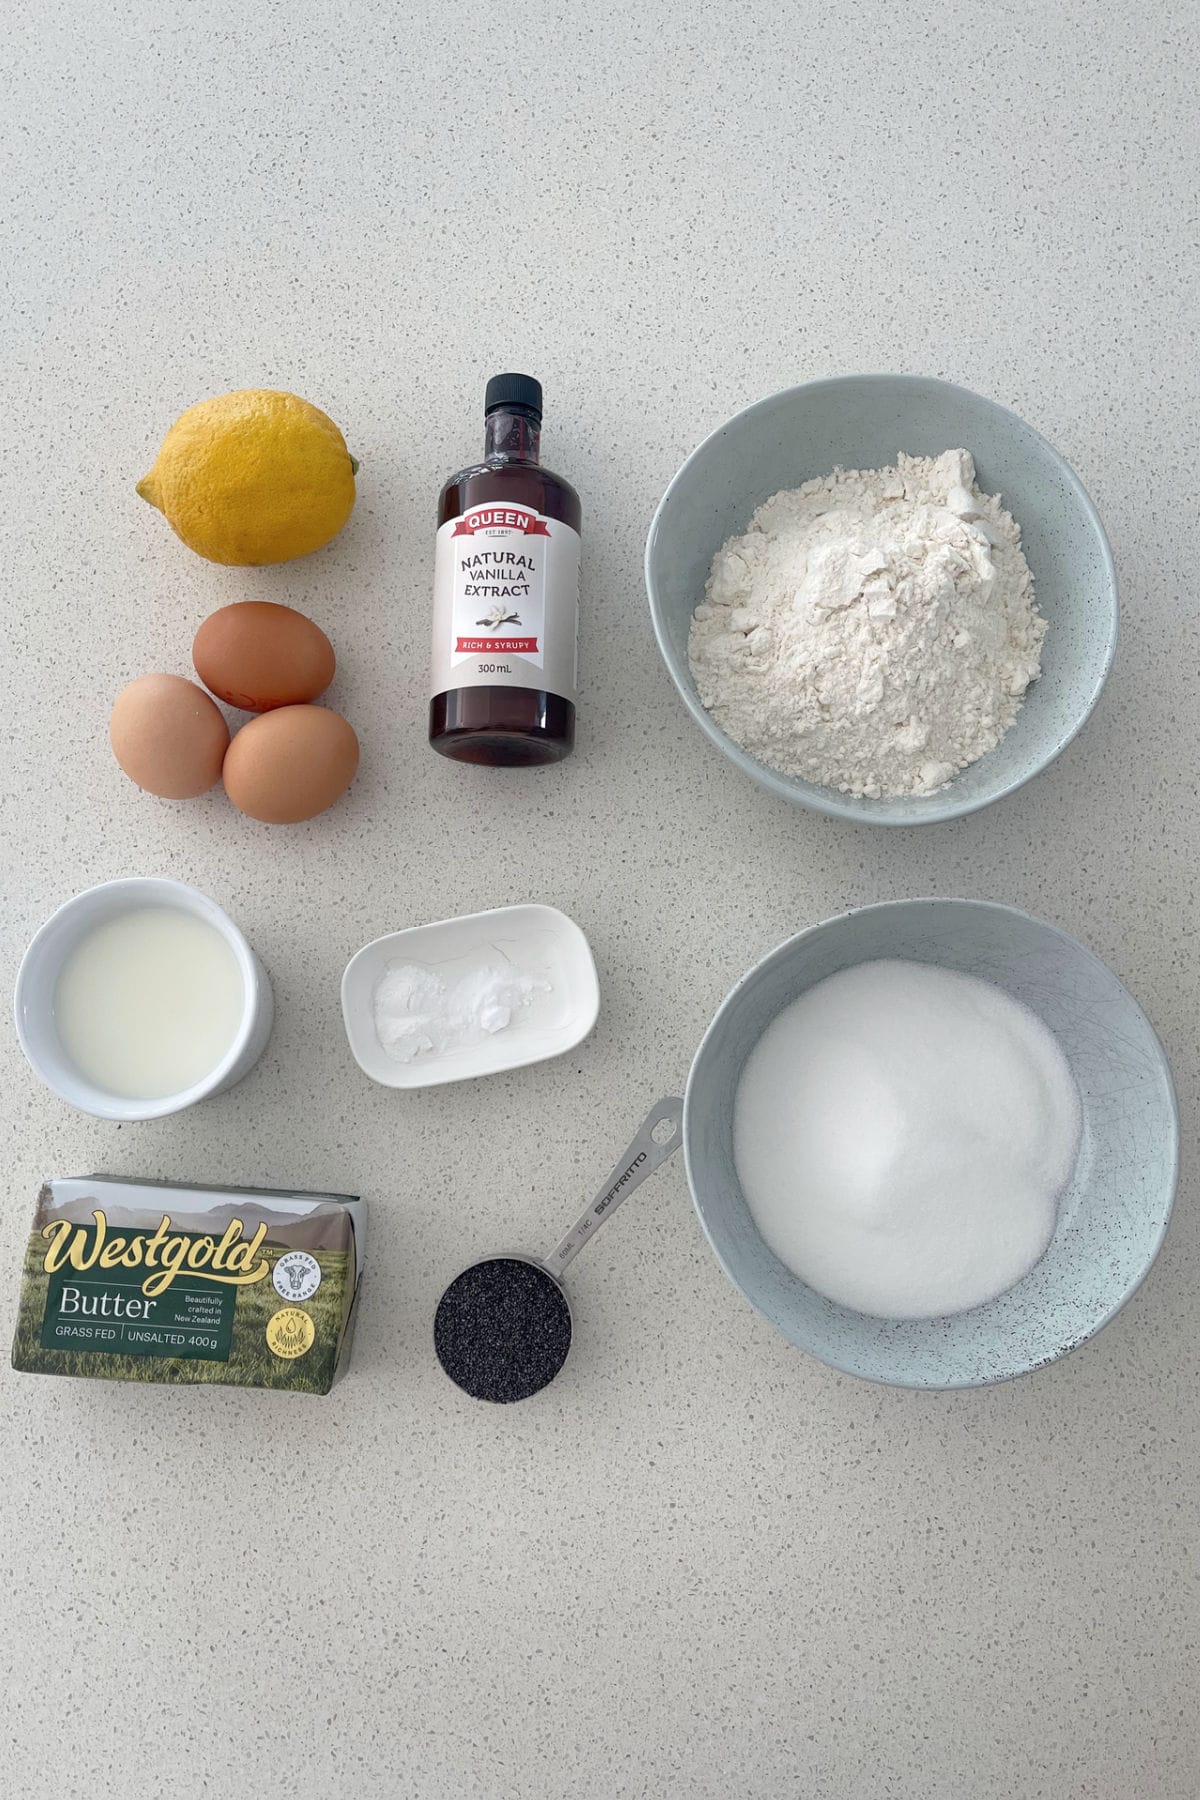 Ingredients to make a Lemon and Poppy Seed cake on a speckled bench.